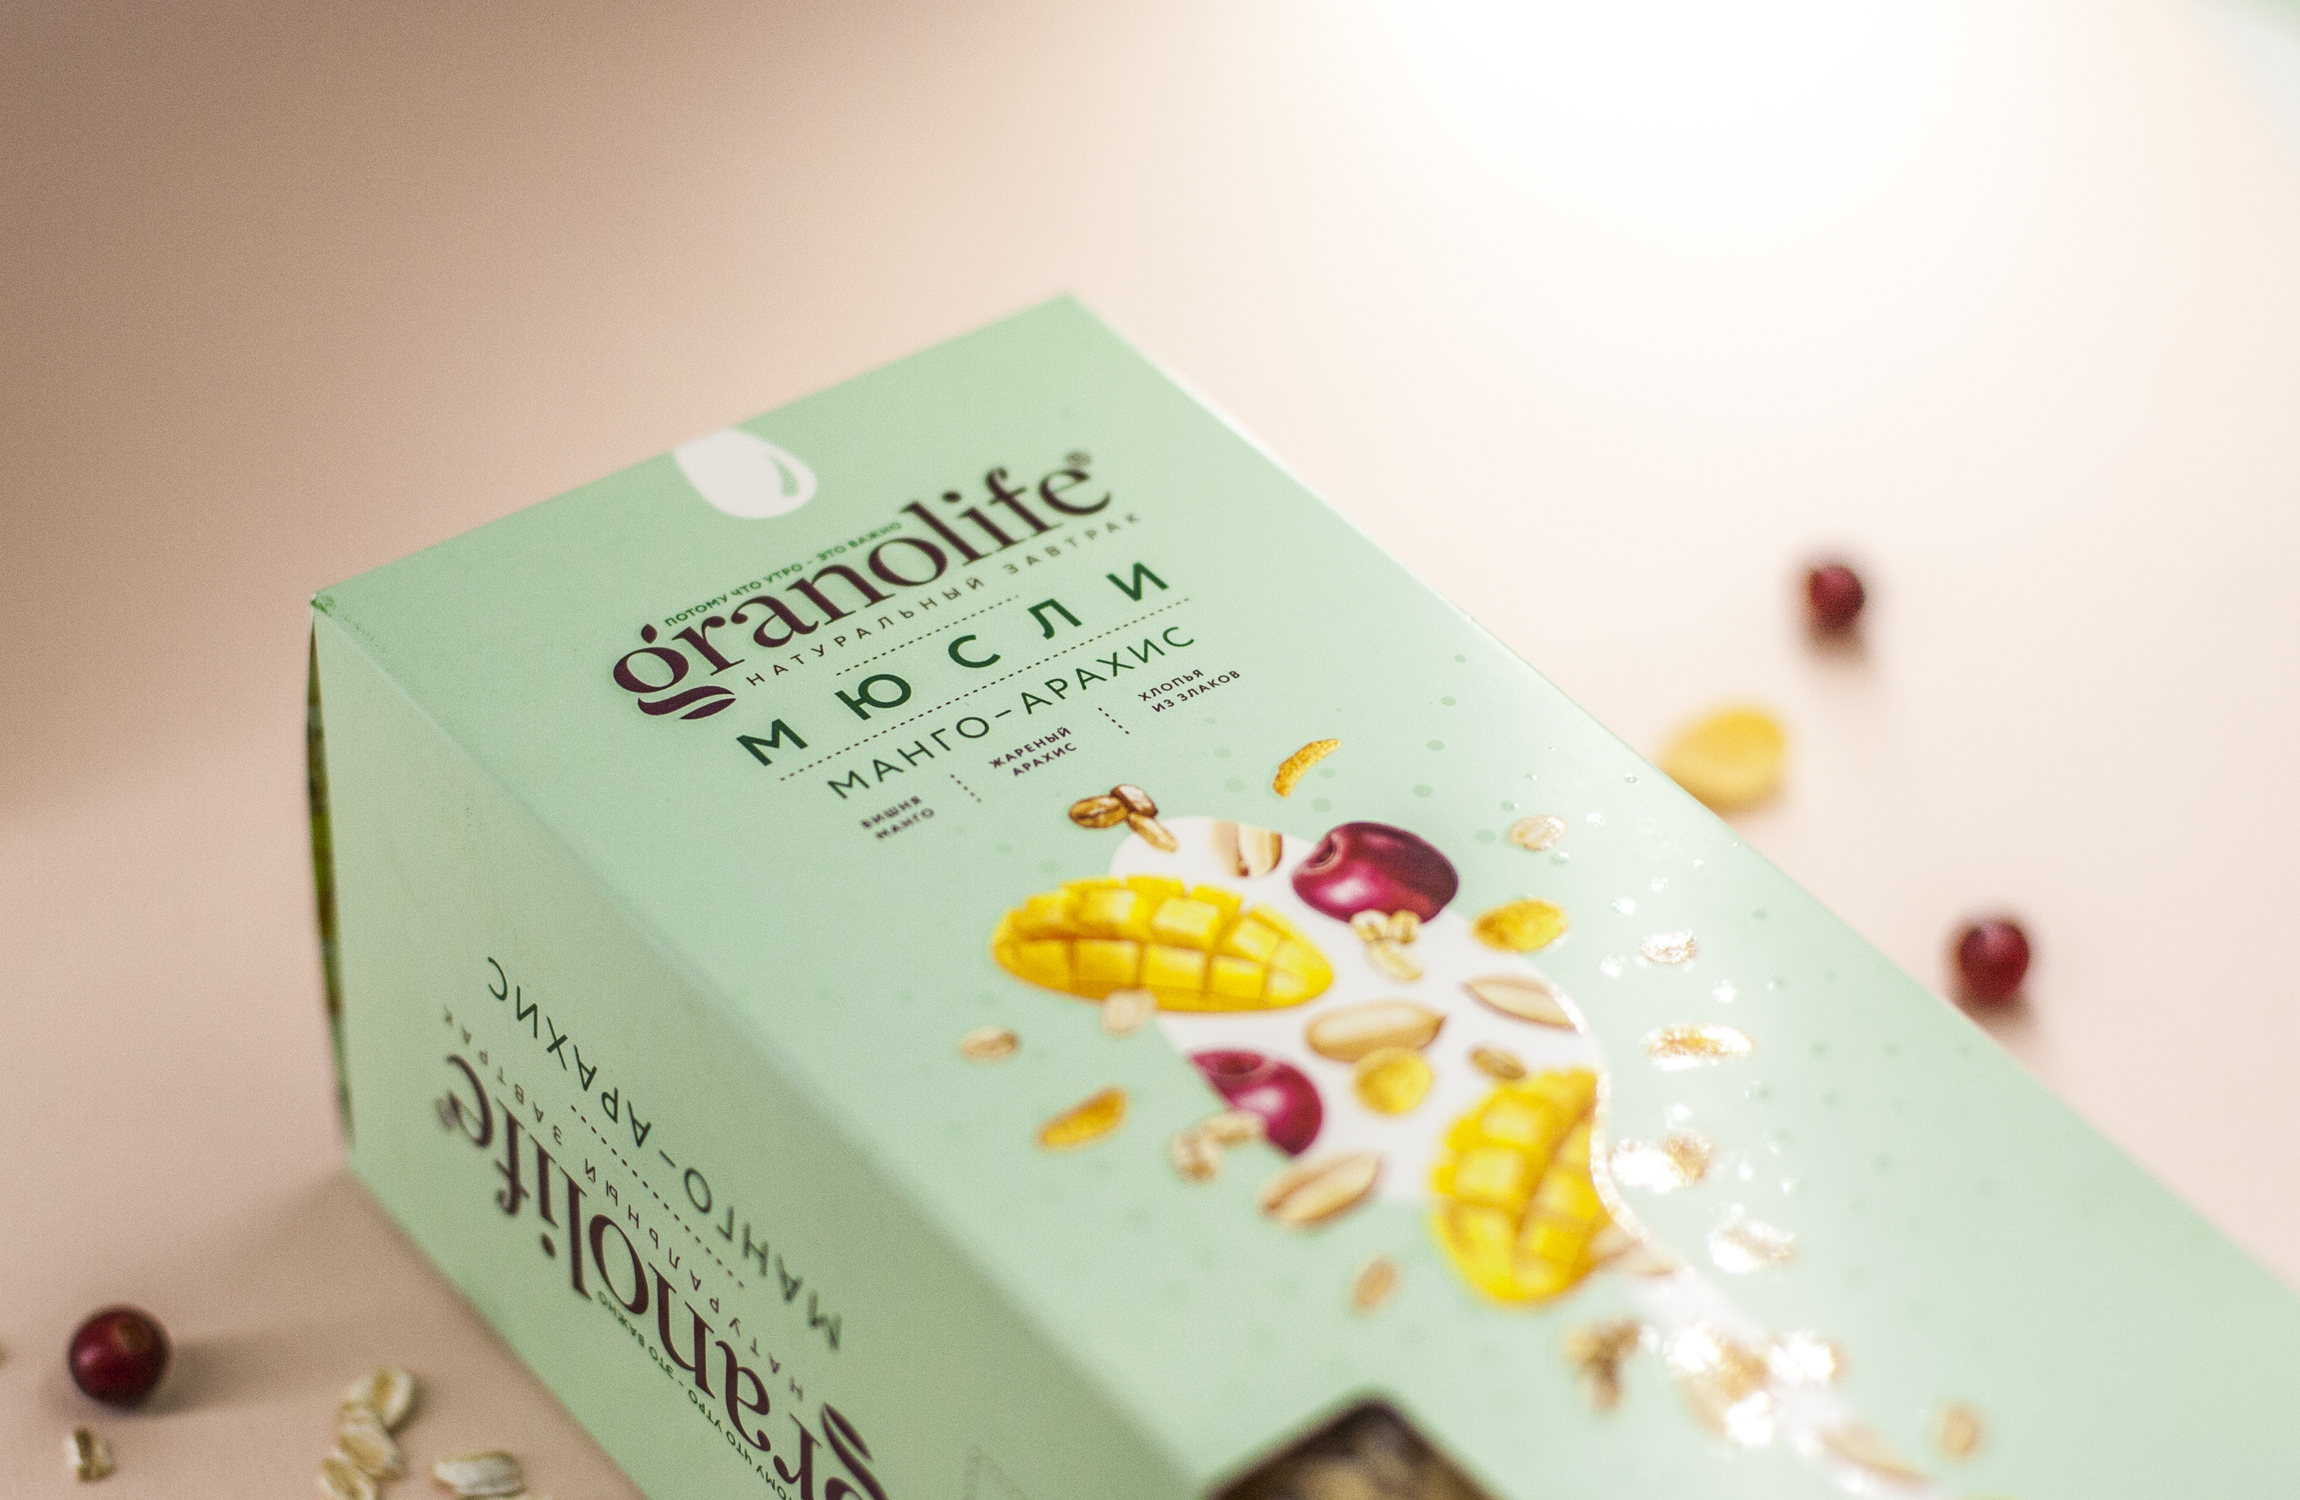 Explosion of Taste in Every Spoonful – A New Line of Granolife Muesli